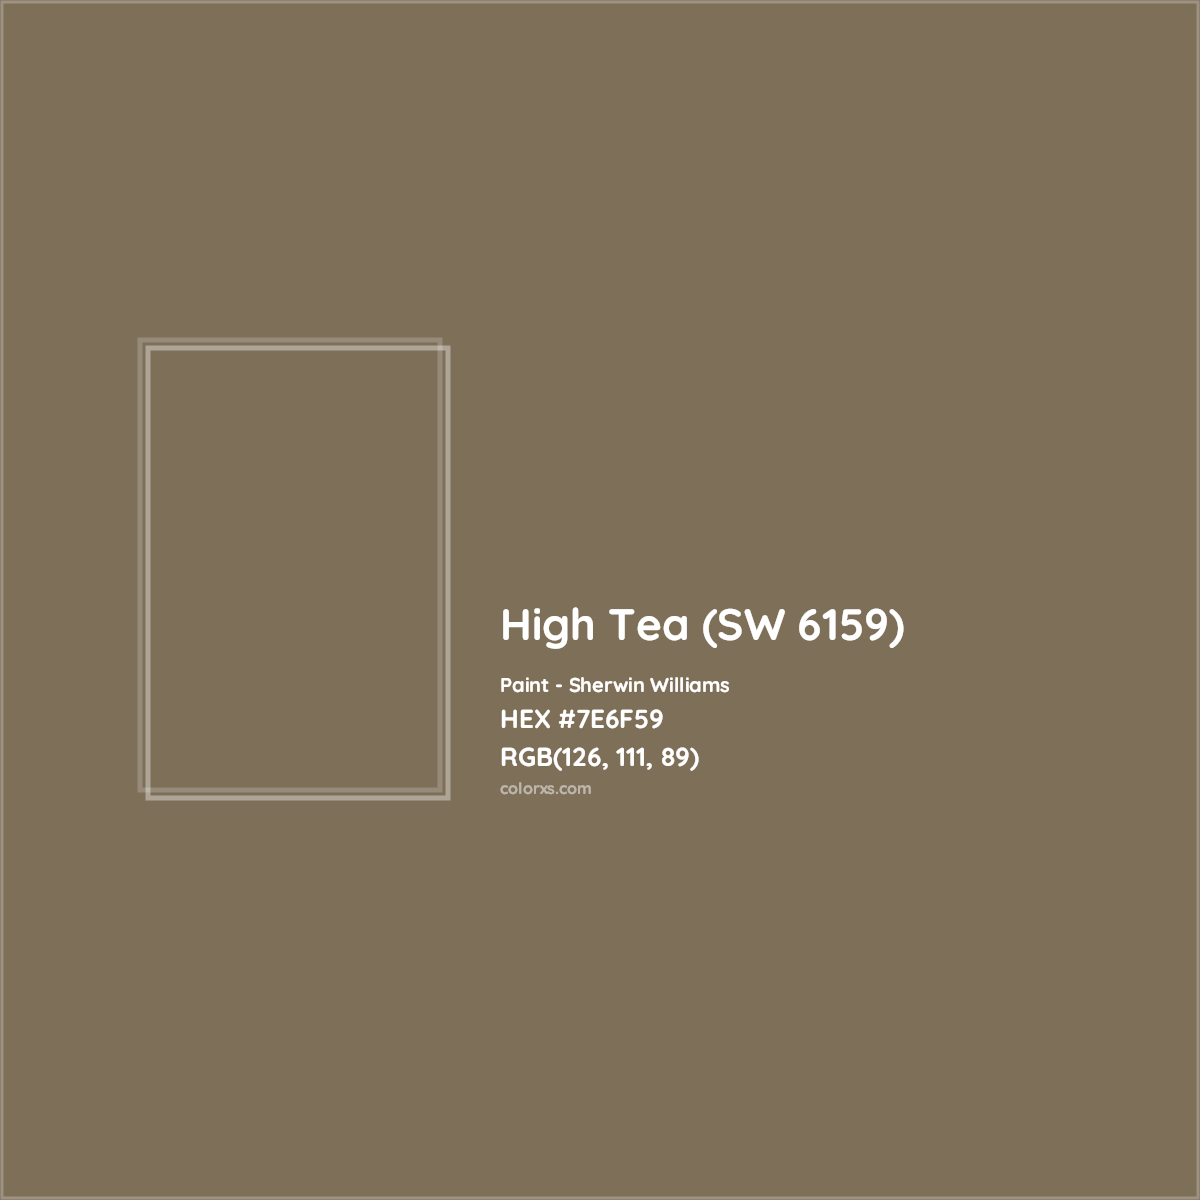 HEX #7E6F59 High Tea (SW 6159) Paint Sherwin Williams - Color Code